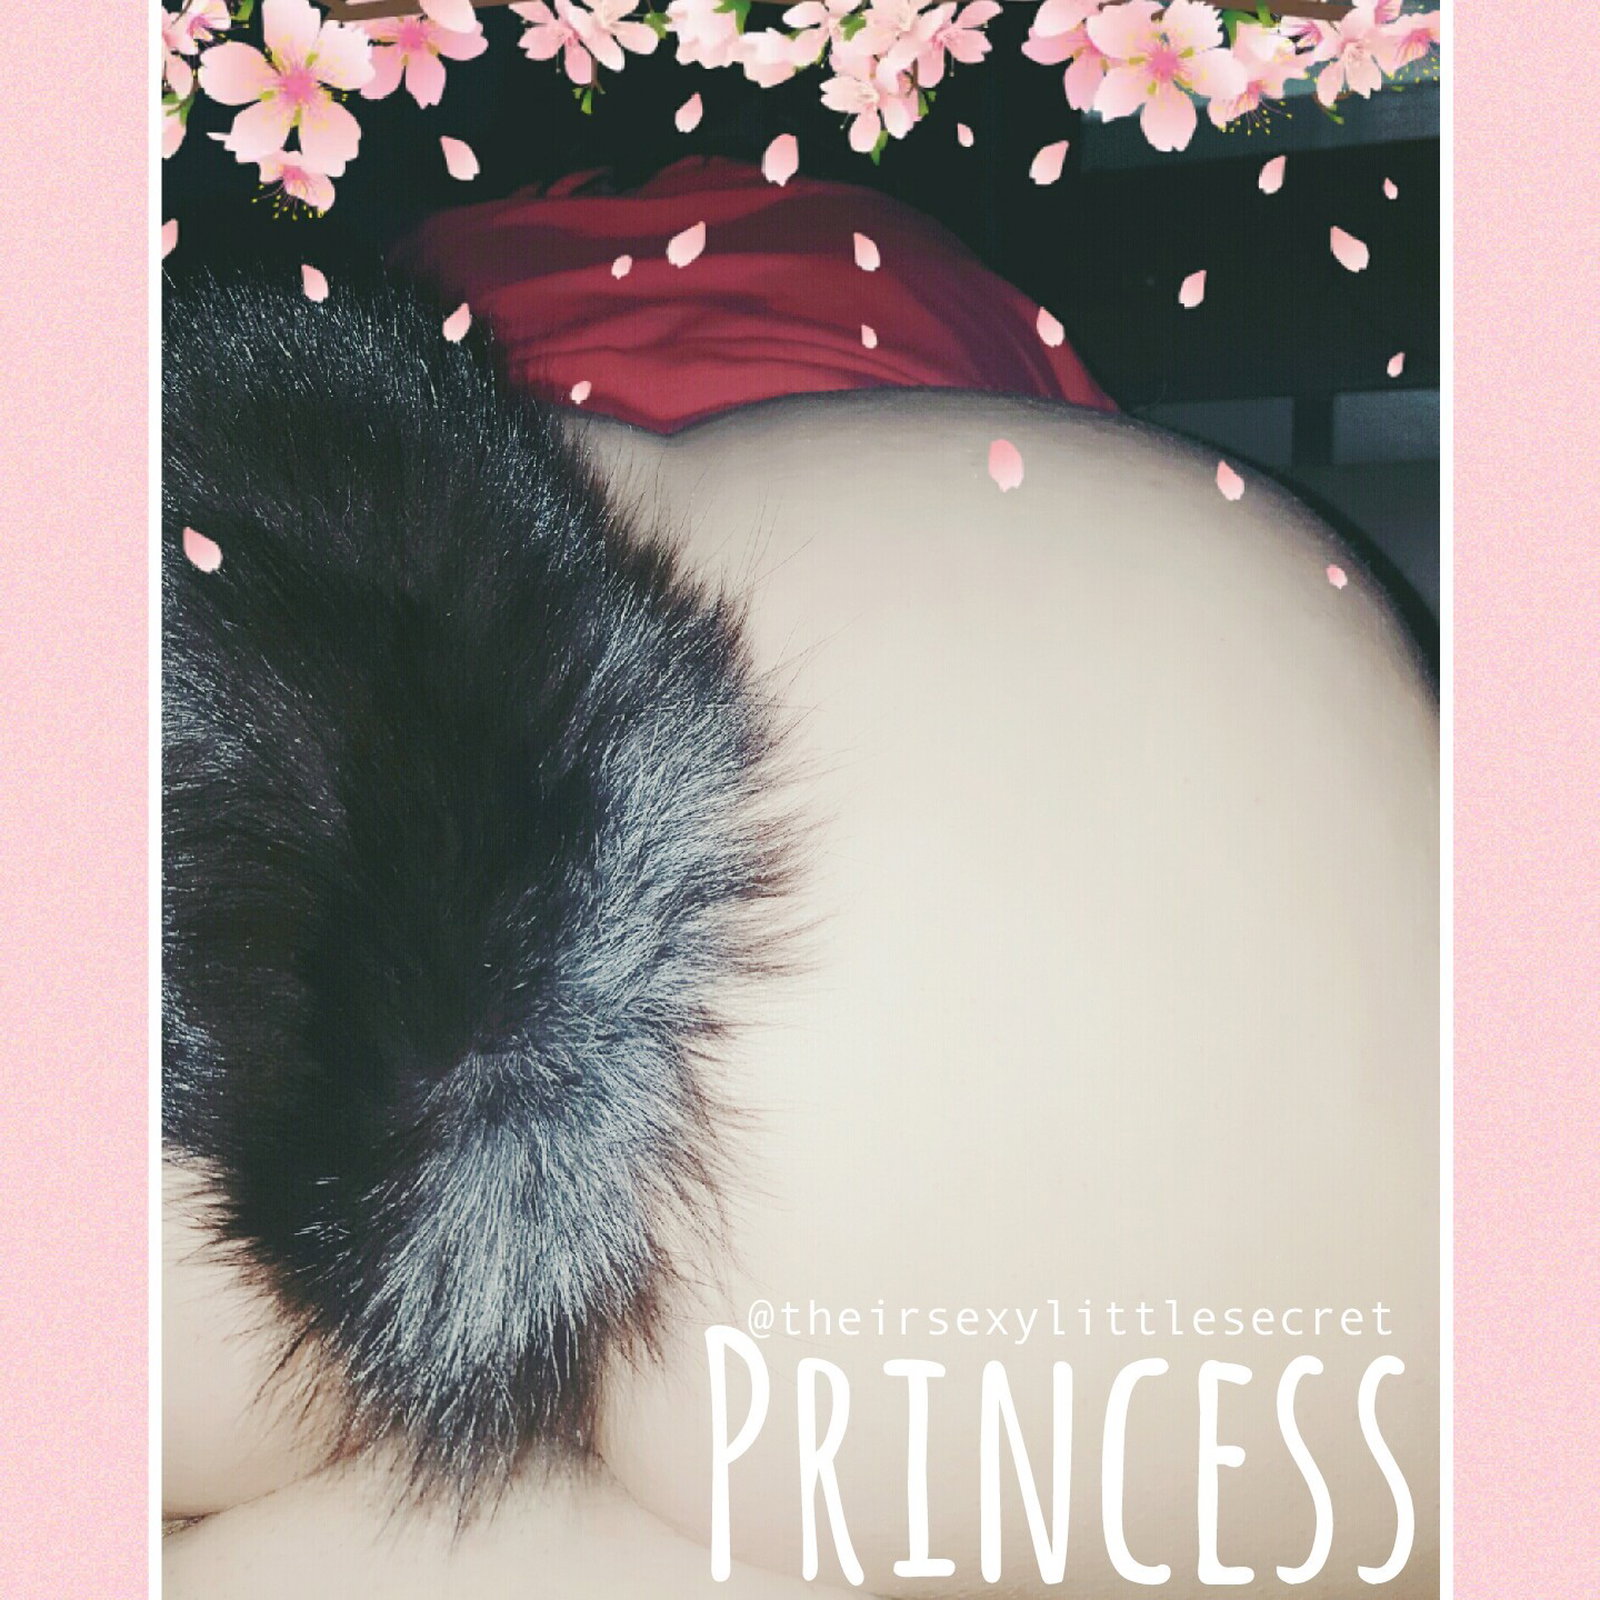 Watch the Photo by sexylittlesecret with the username @sexylittlesecret, who is a verified user, posted on February 6, 2017 and the text says 'I GOT A TAIL!!! 
~ Happy Princess #dd/lg  #blog  #dd/lg  #lifestyle  #daddy  #daddy  #kink  #daddy  #dom  #daddyslittlegirl  #daddysgirl  #daddysprincess  #daddys  #little  #princess  #daddys  #little  #girl  #daddys  #little  #kitten  #buttplug  #butt..'